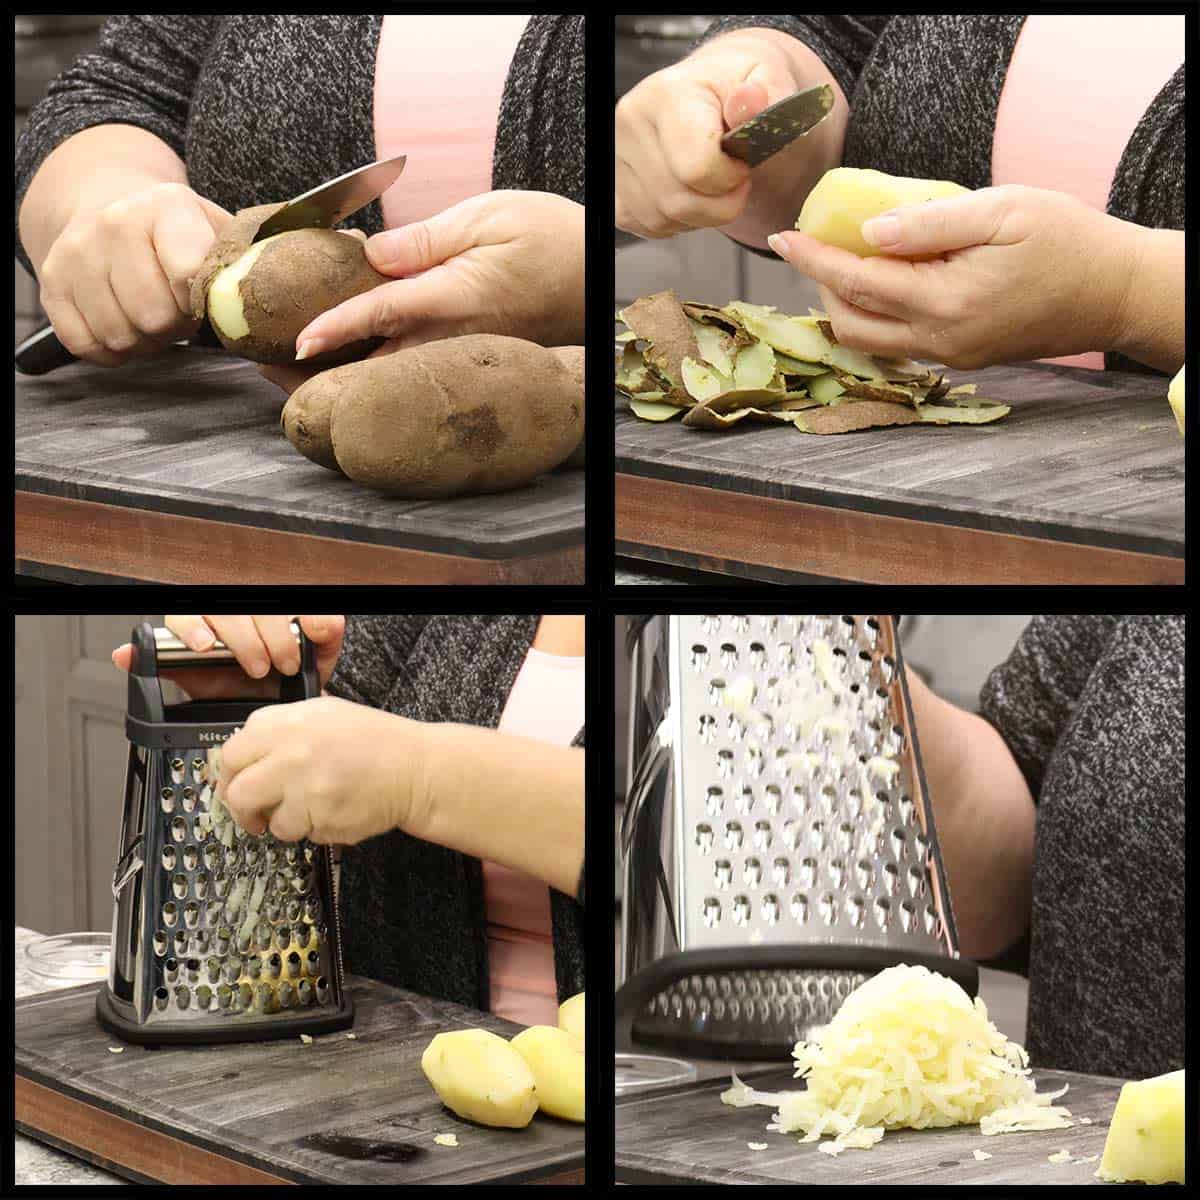 peeling and grating potatoes with a knife and box grater.